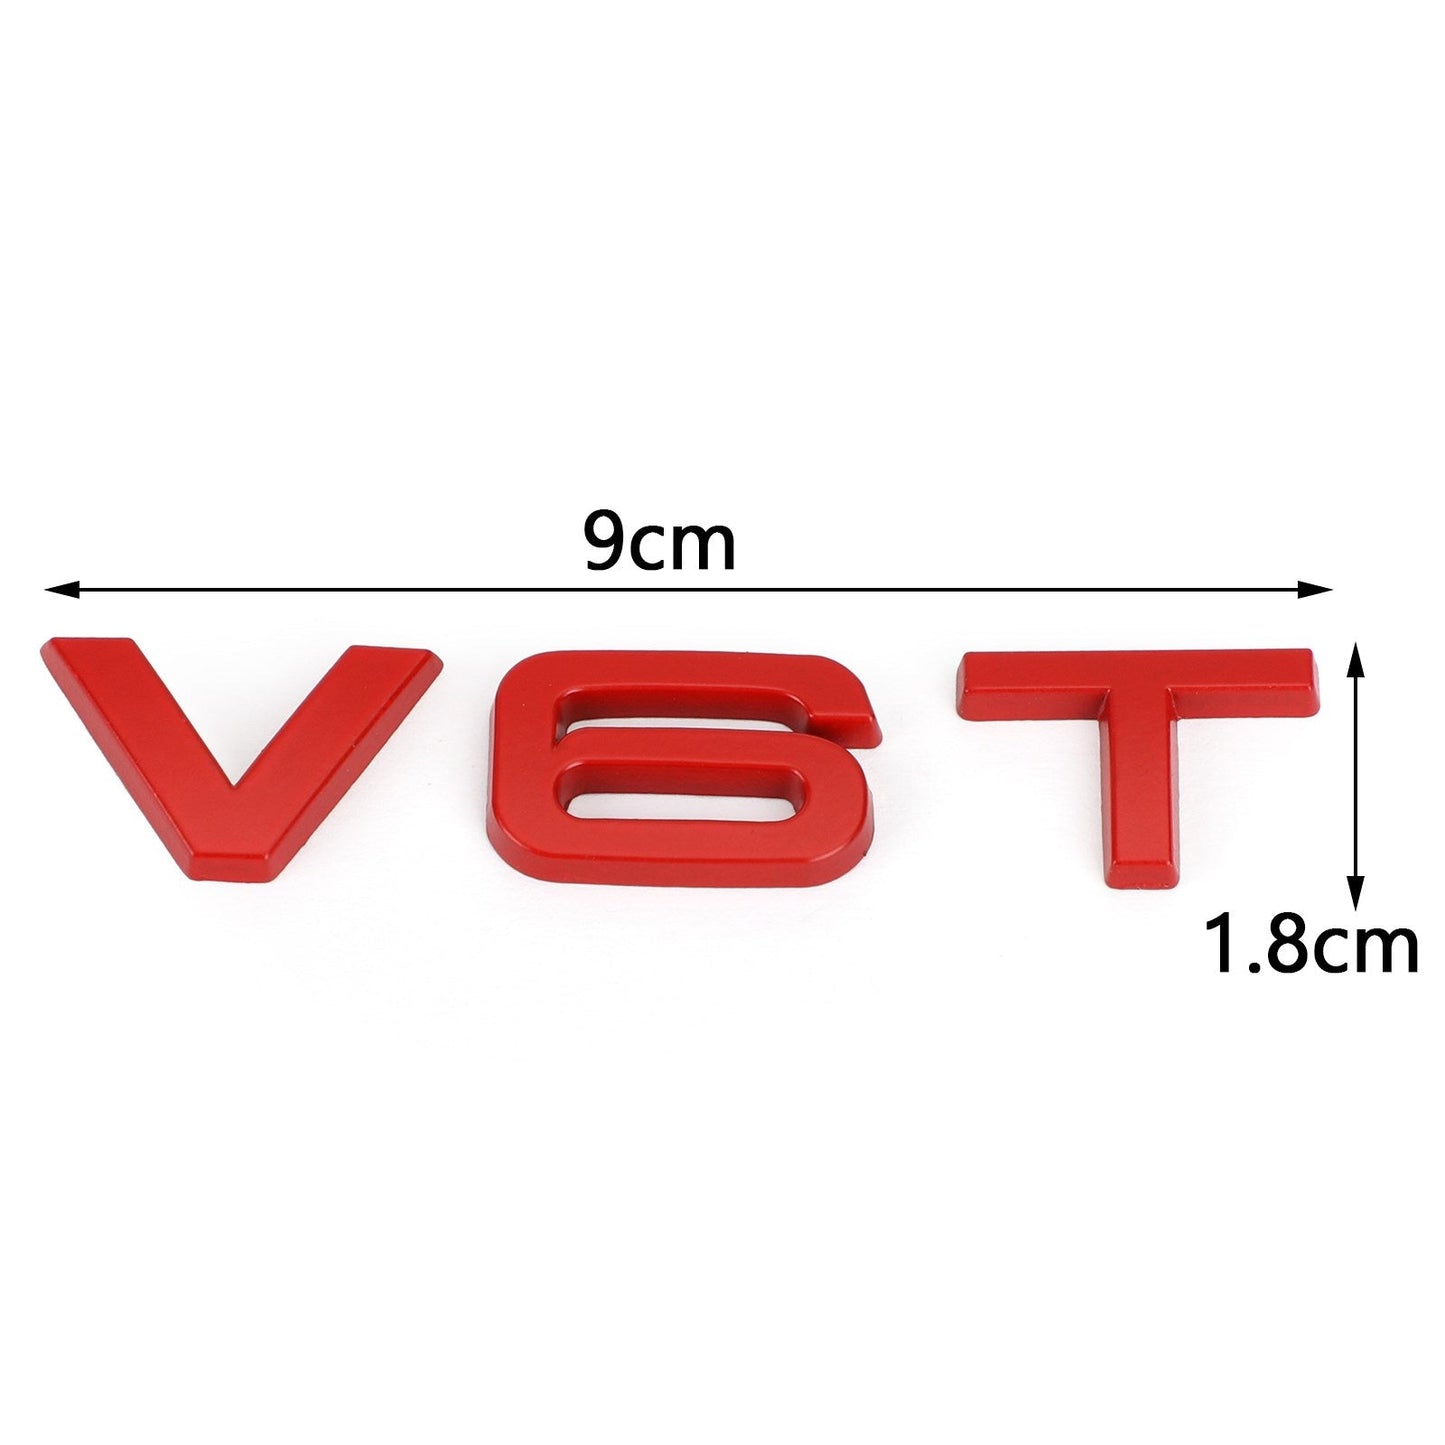 V6T Emblem Badge Fit For AUDI A1 A3 A4 A5 A6 A7 Q3 Q5 Q7 S6 S7 S8 S4 SQ5 Red